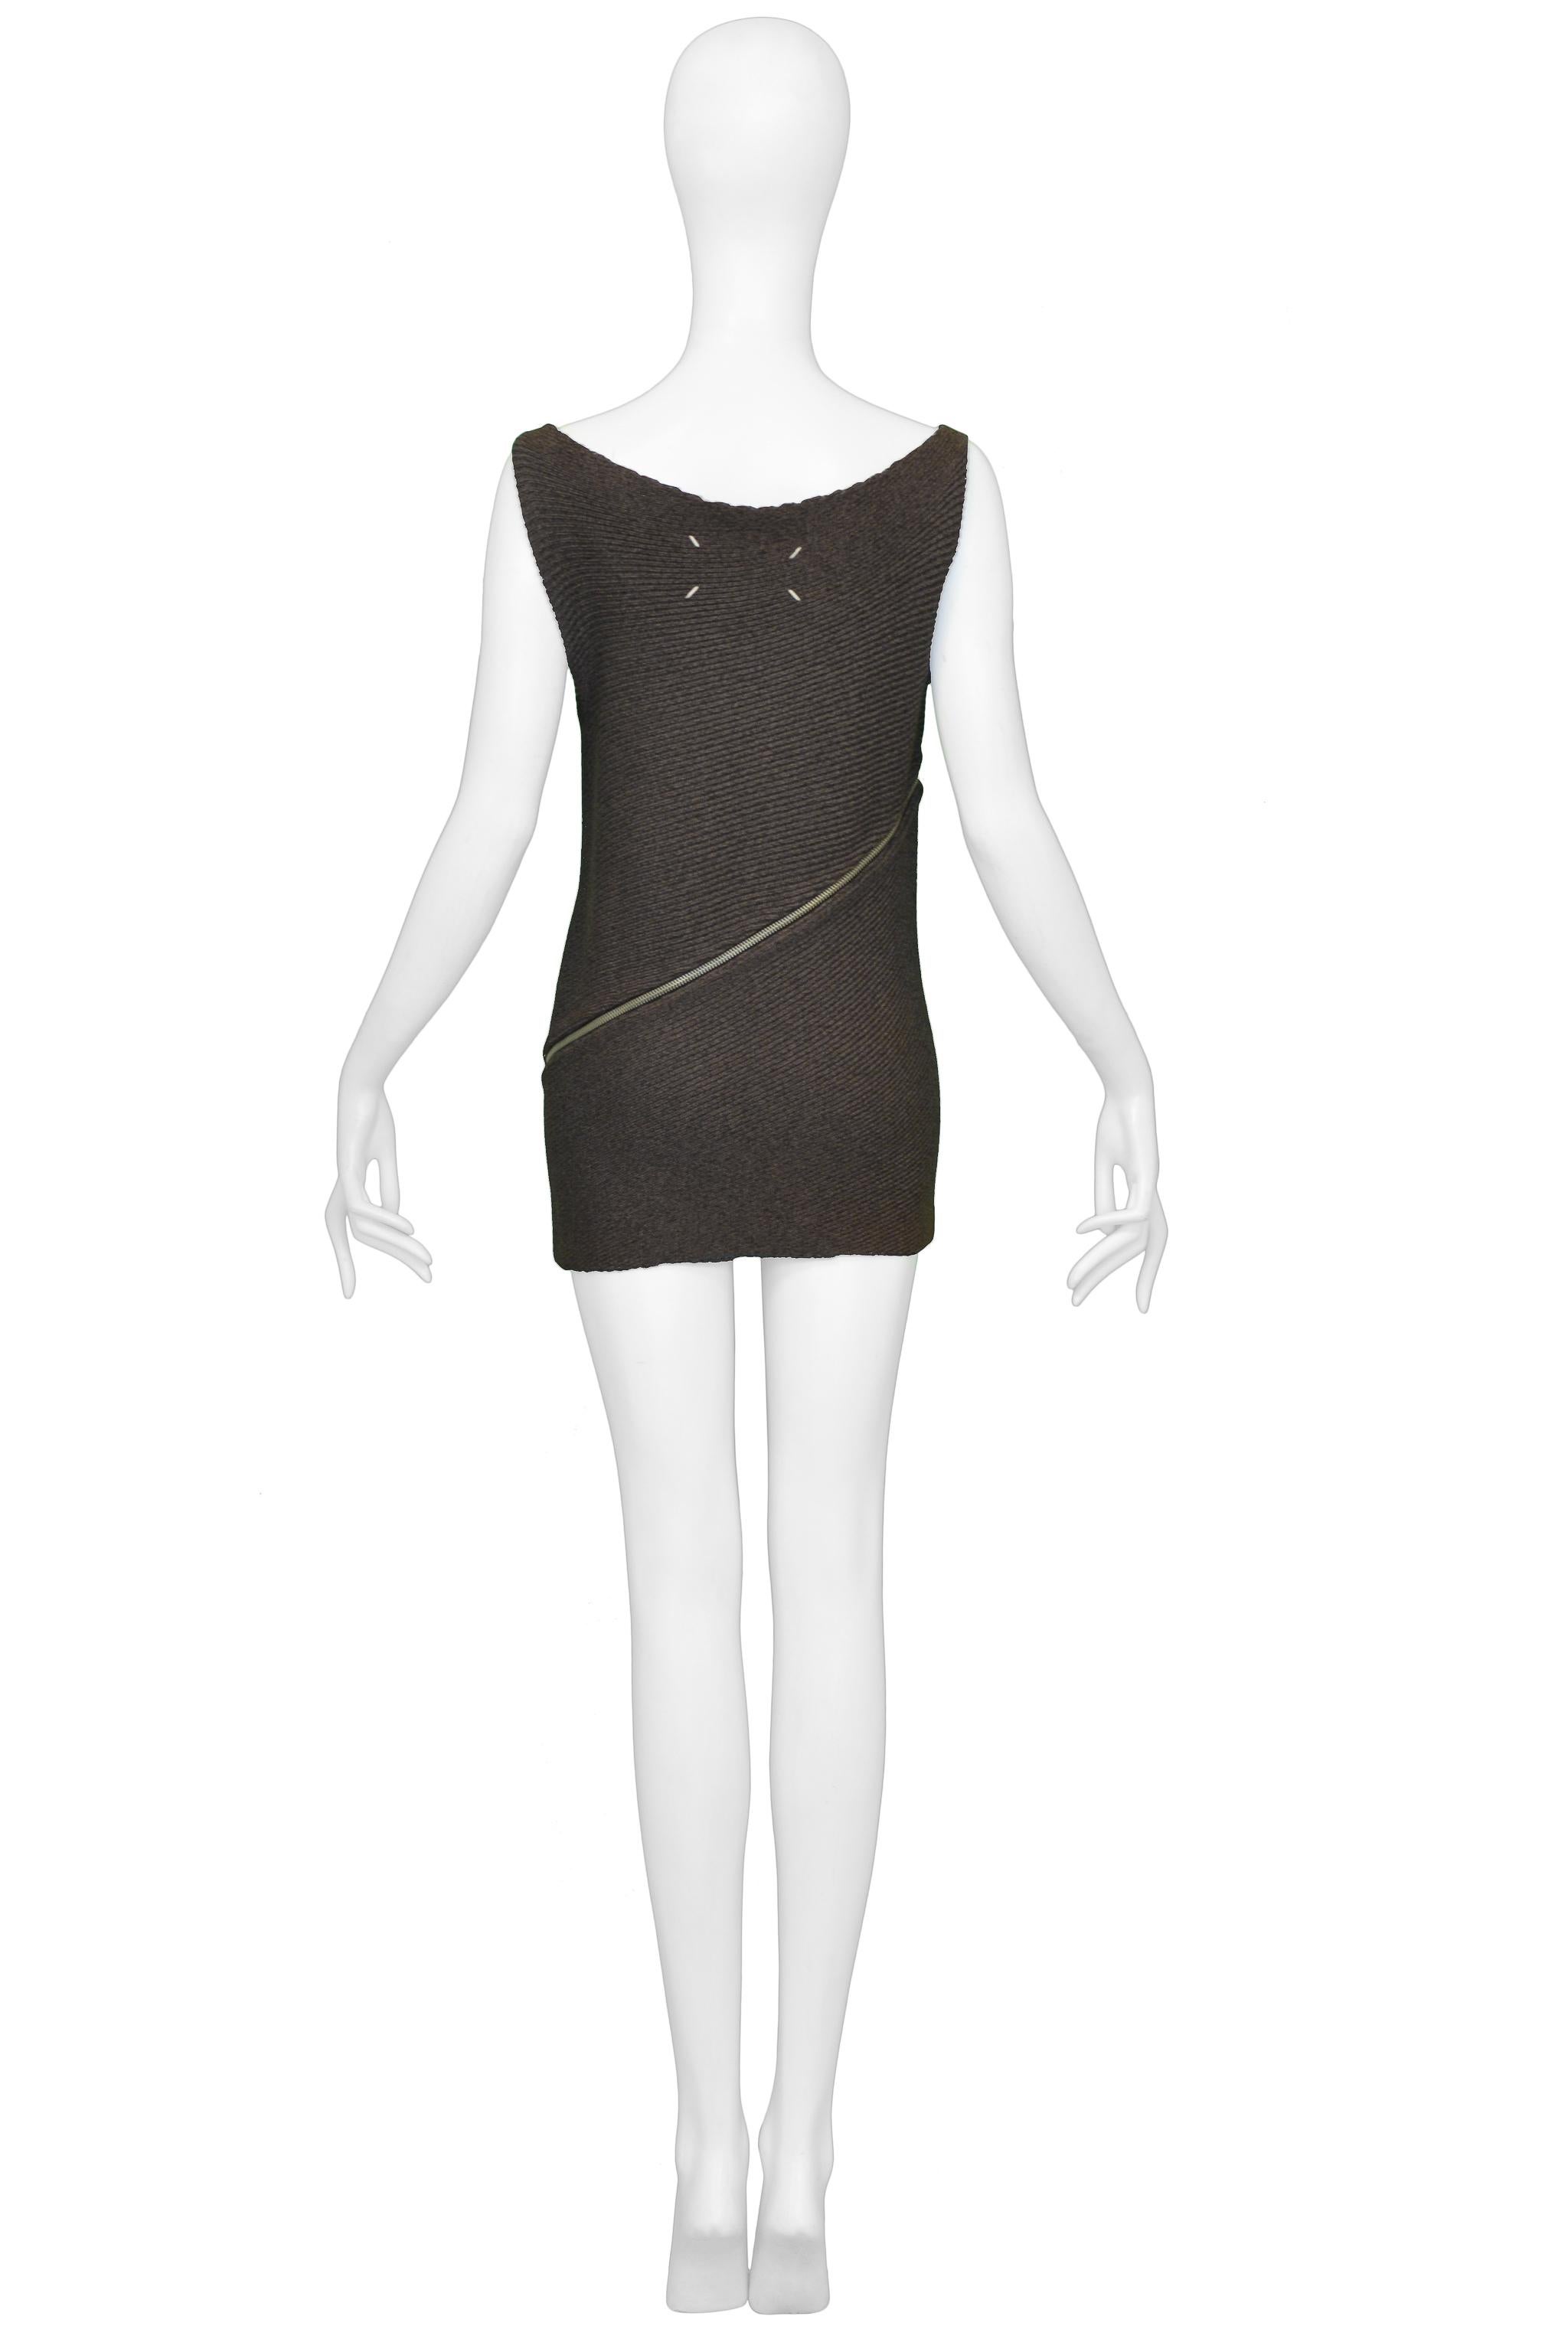 Maison Martin Margiela Brown Knit Zipper Top In Excellent Condition In Los Angeles, CA